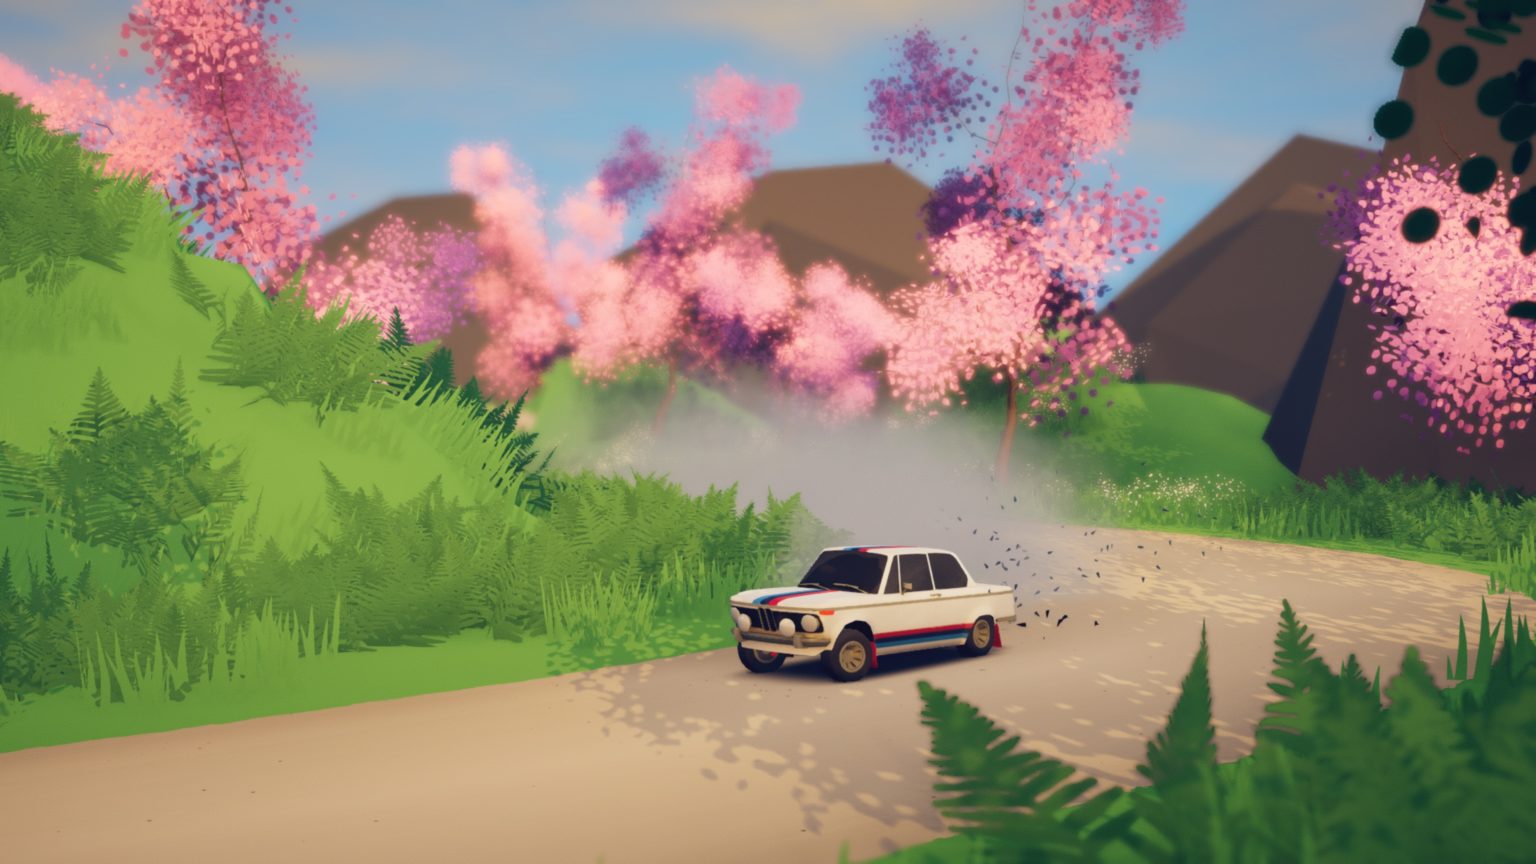 Art of Rally free download